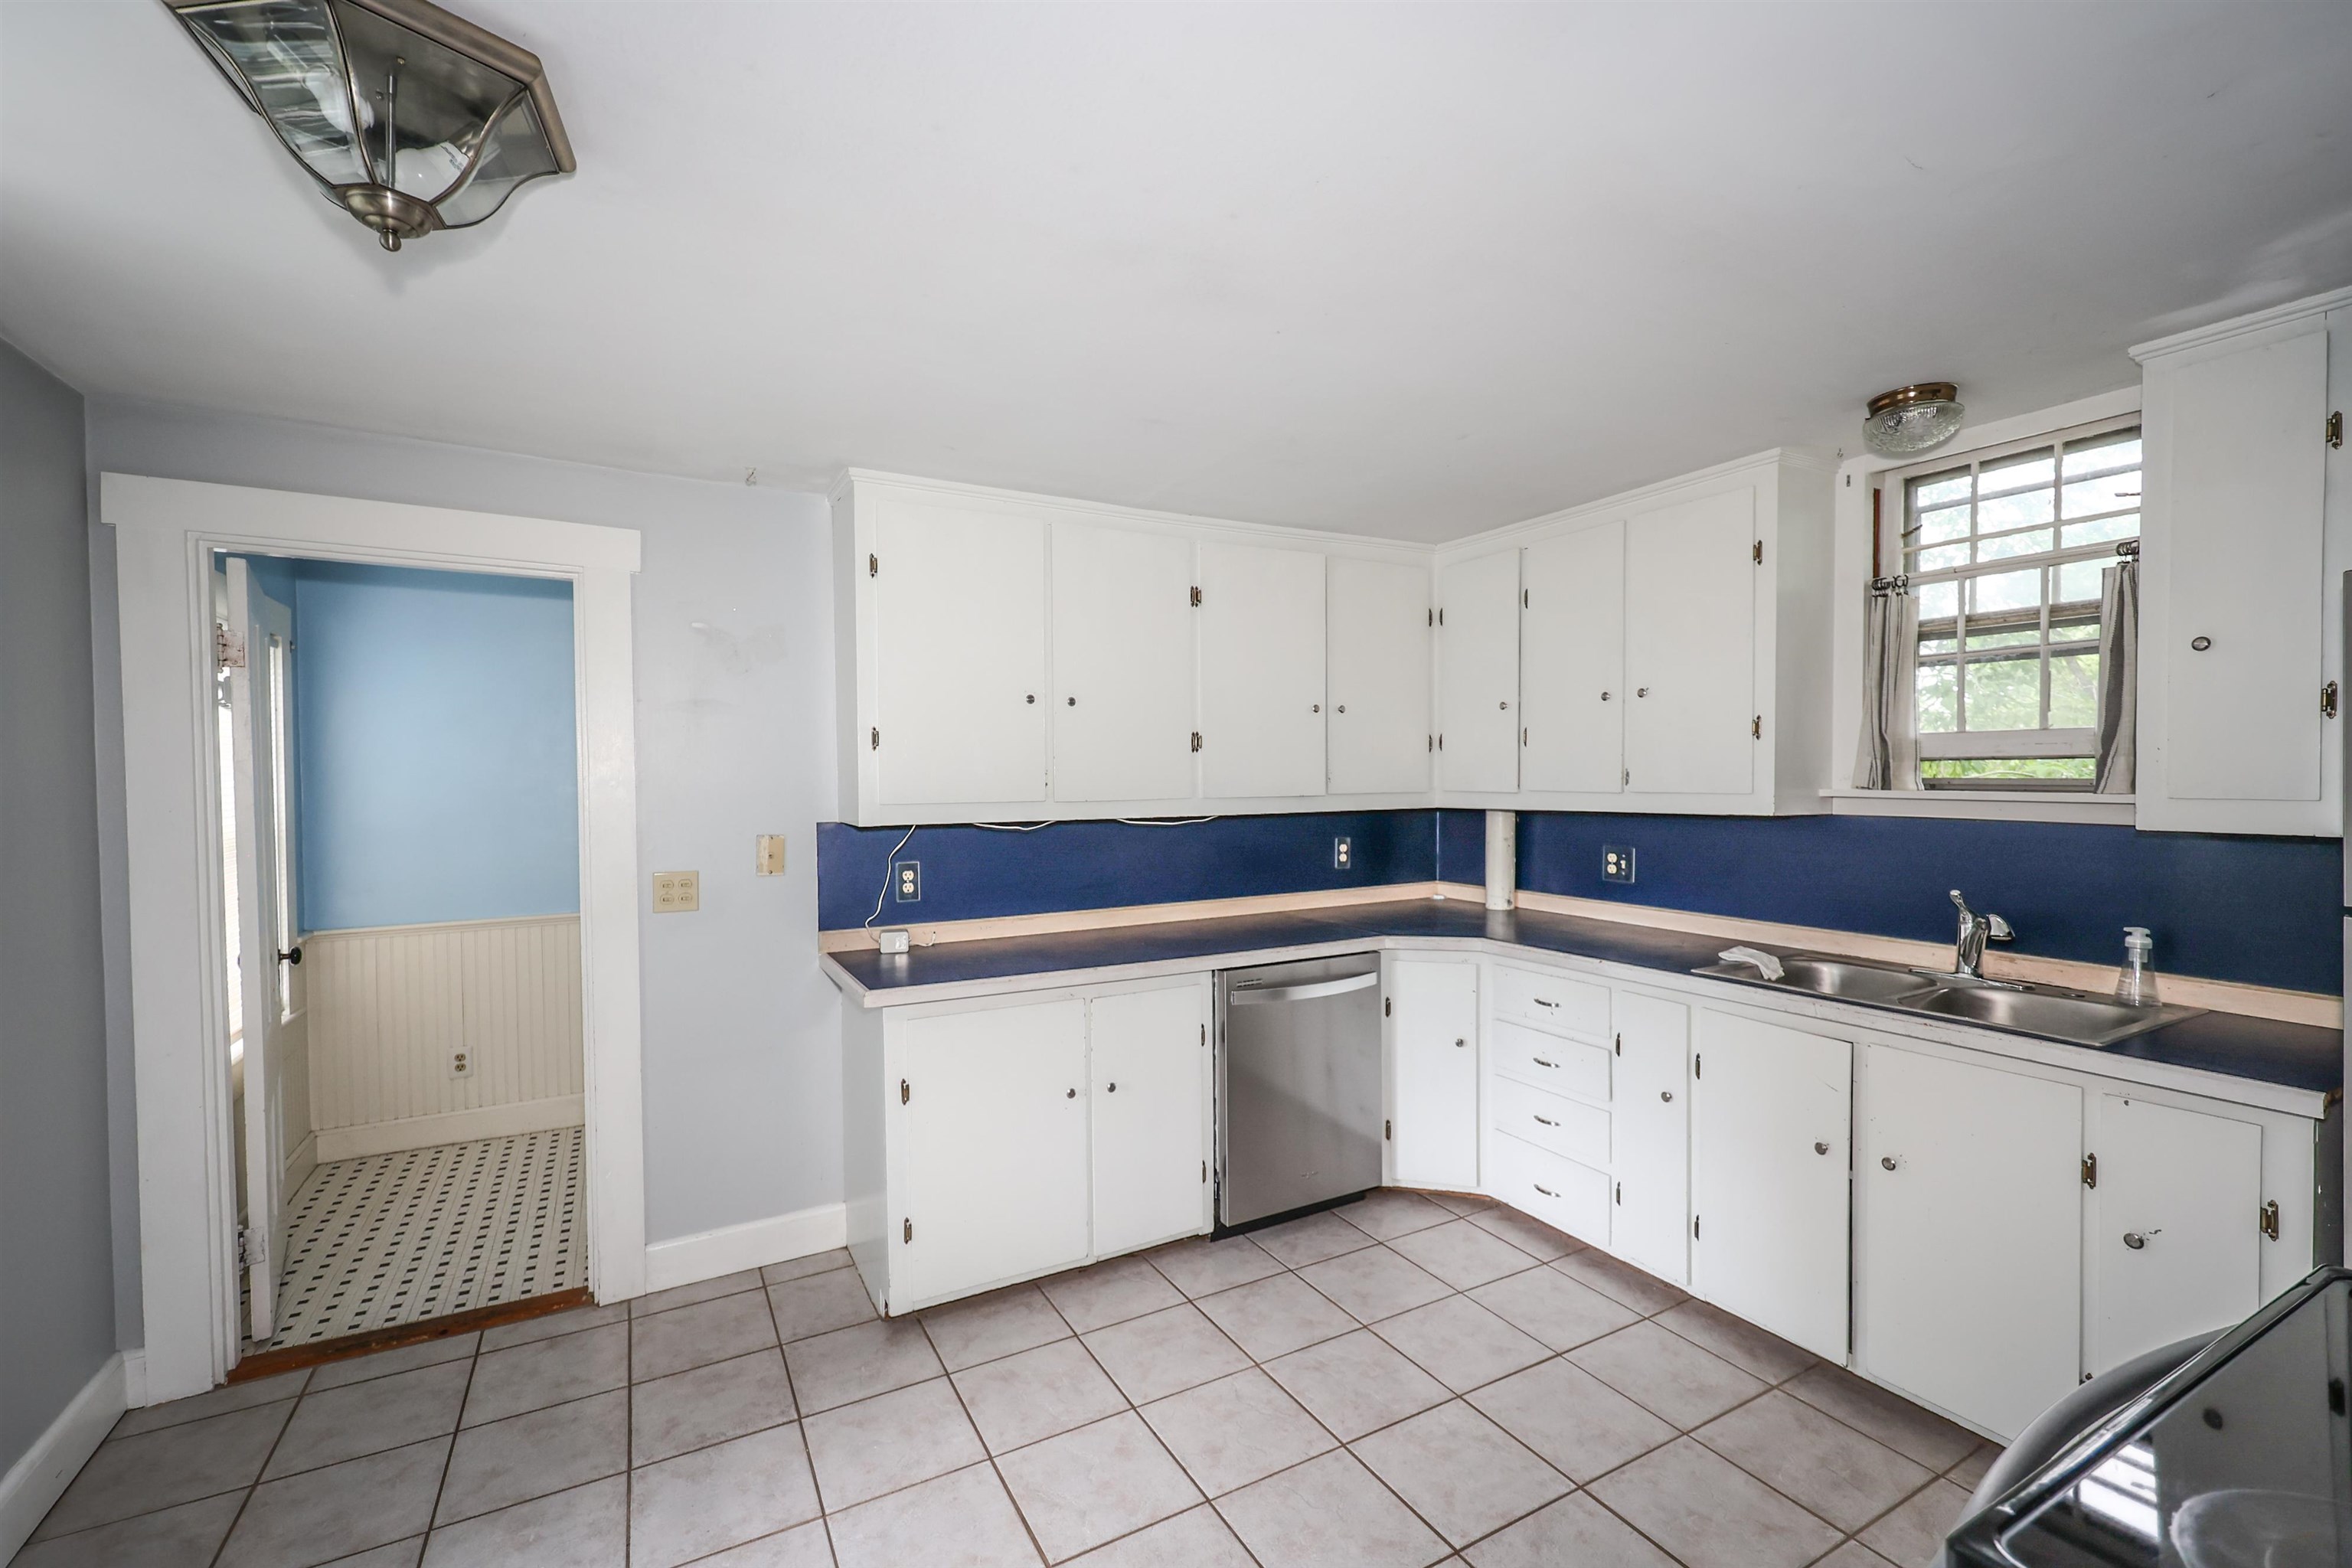 Unit A - Nice sized kitchen with tile flooring and stainless steel appliances